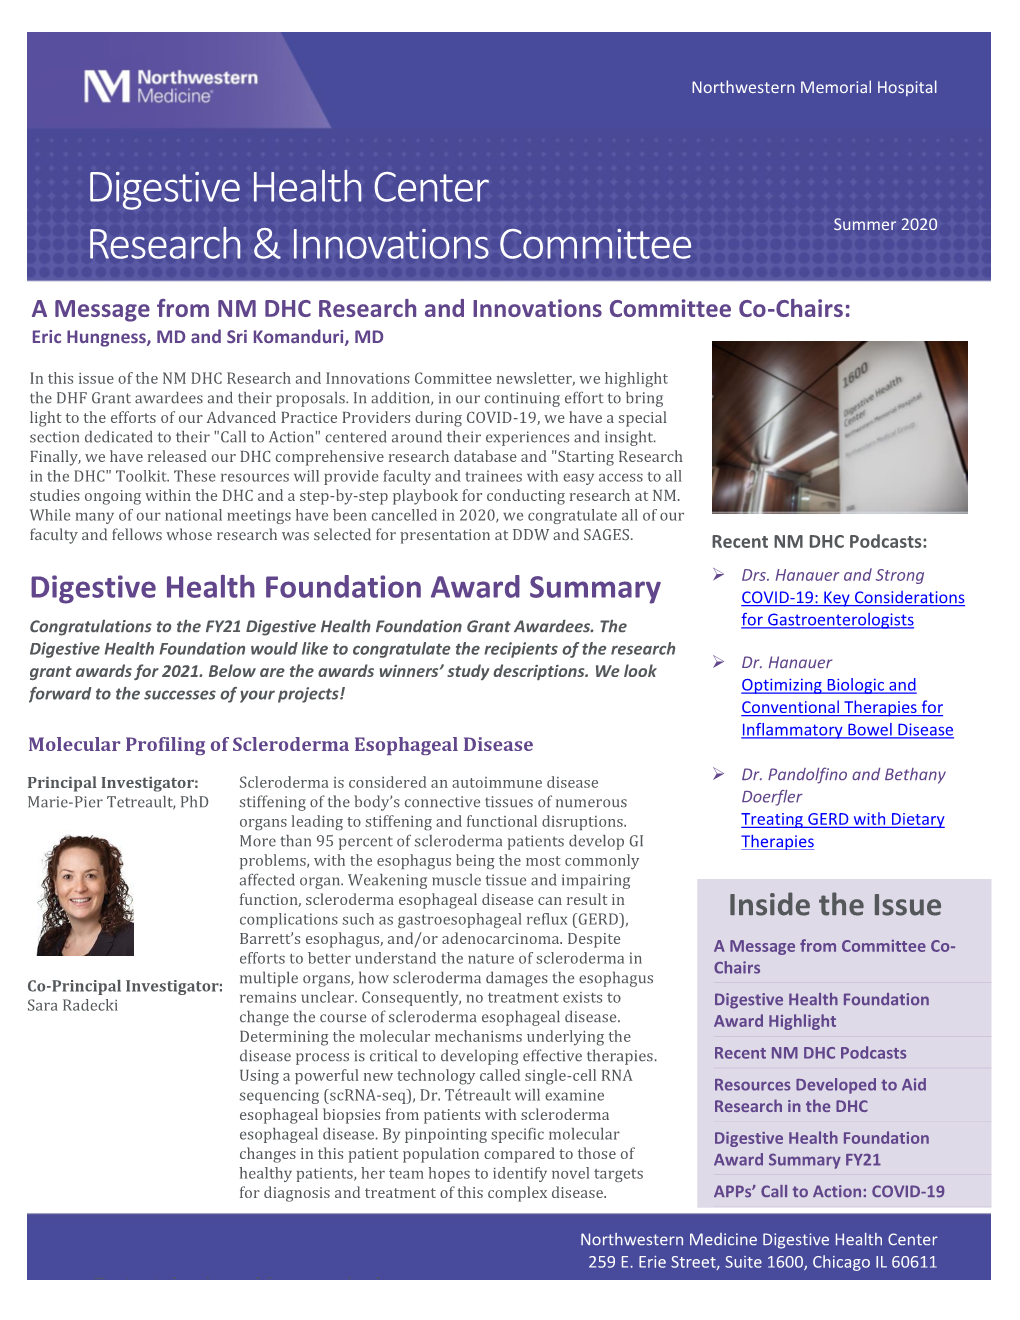 Digestive Health Center Research & Innovations Committee